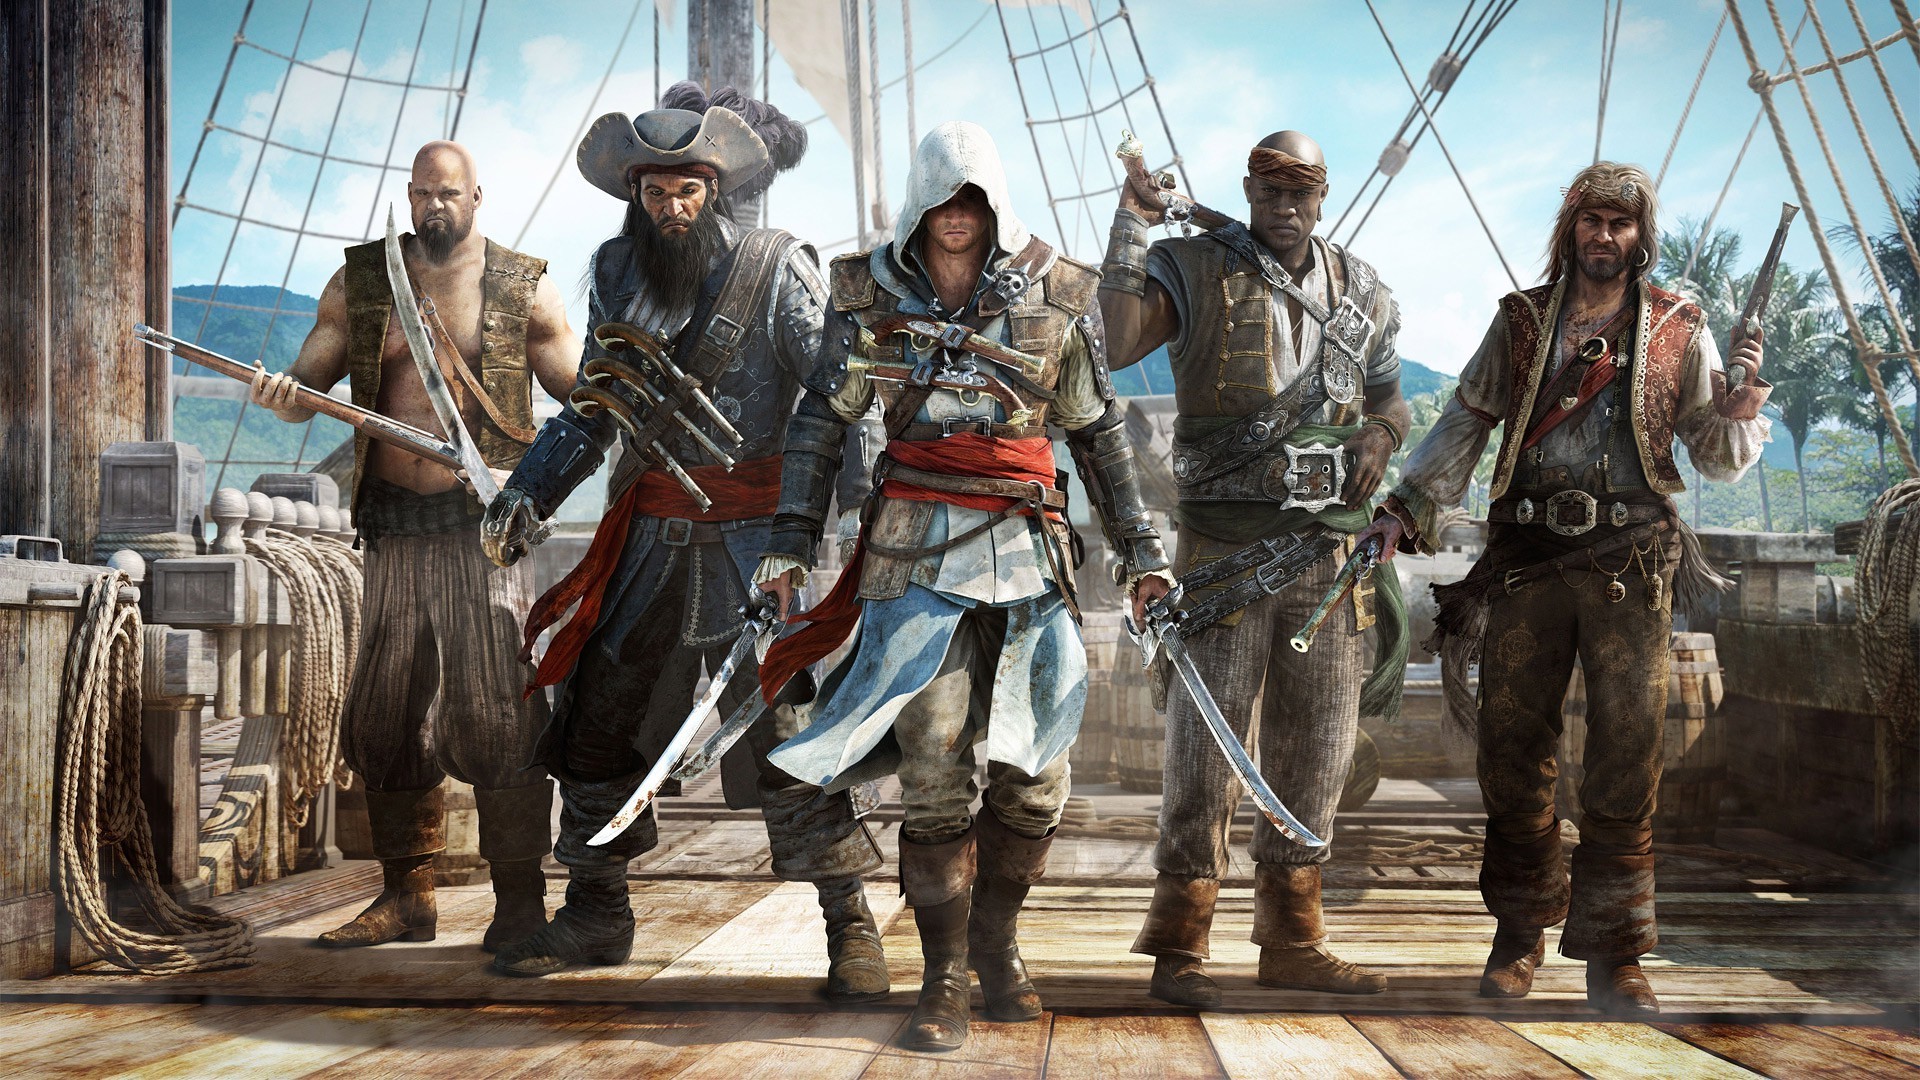 assassin's creed black flag wallpaper hd,action adventure game,movie,pc game,soldier,crew